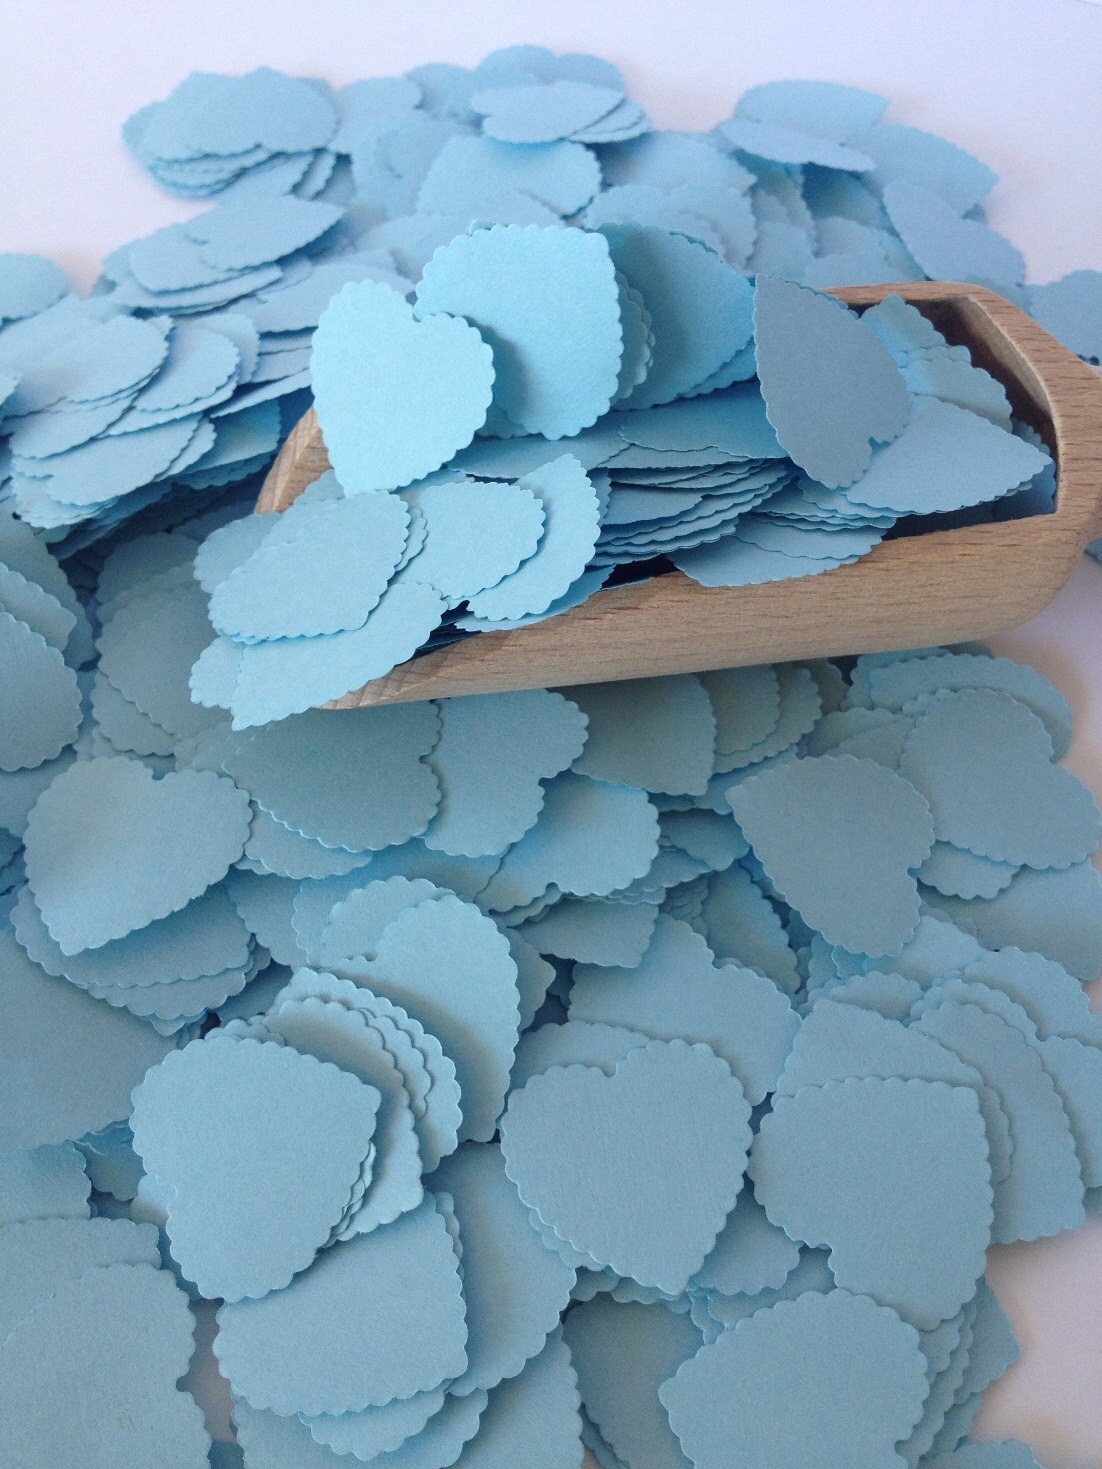 Heart Confetti Choose Silver or Gold / Gender Reveal Confetti / Wedding  Confetti / Party Decorations / Engagement Confetti / Pink and Blue 